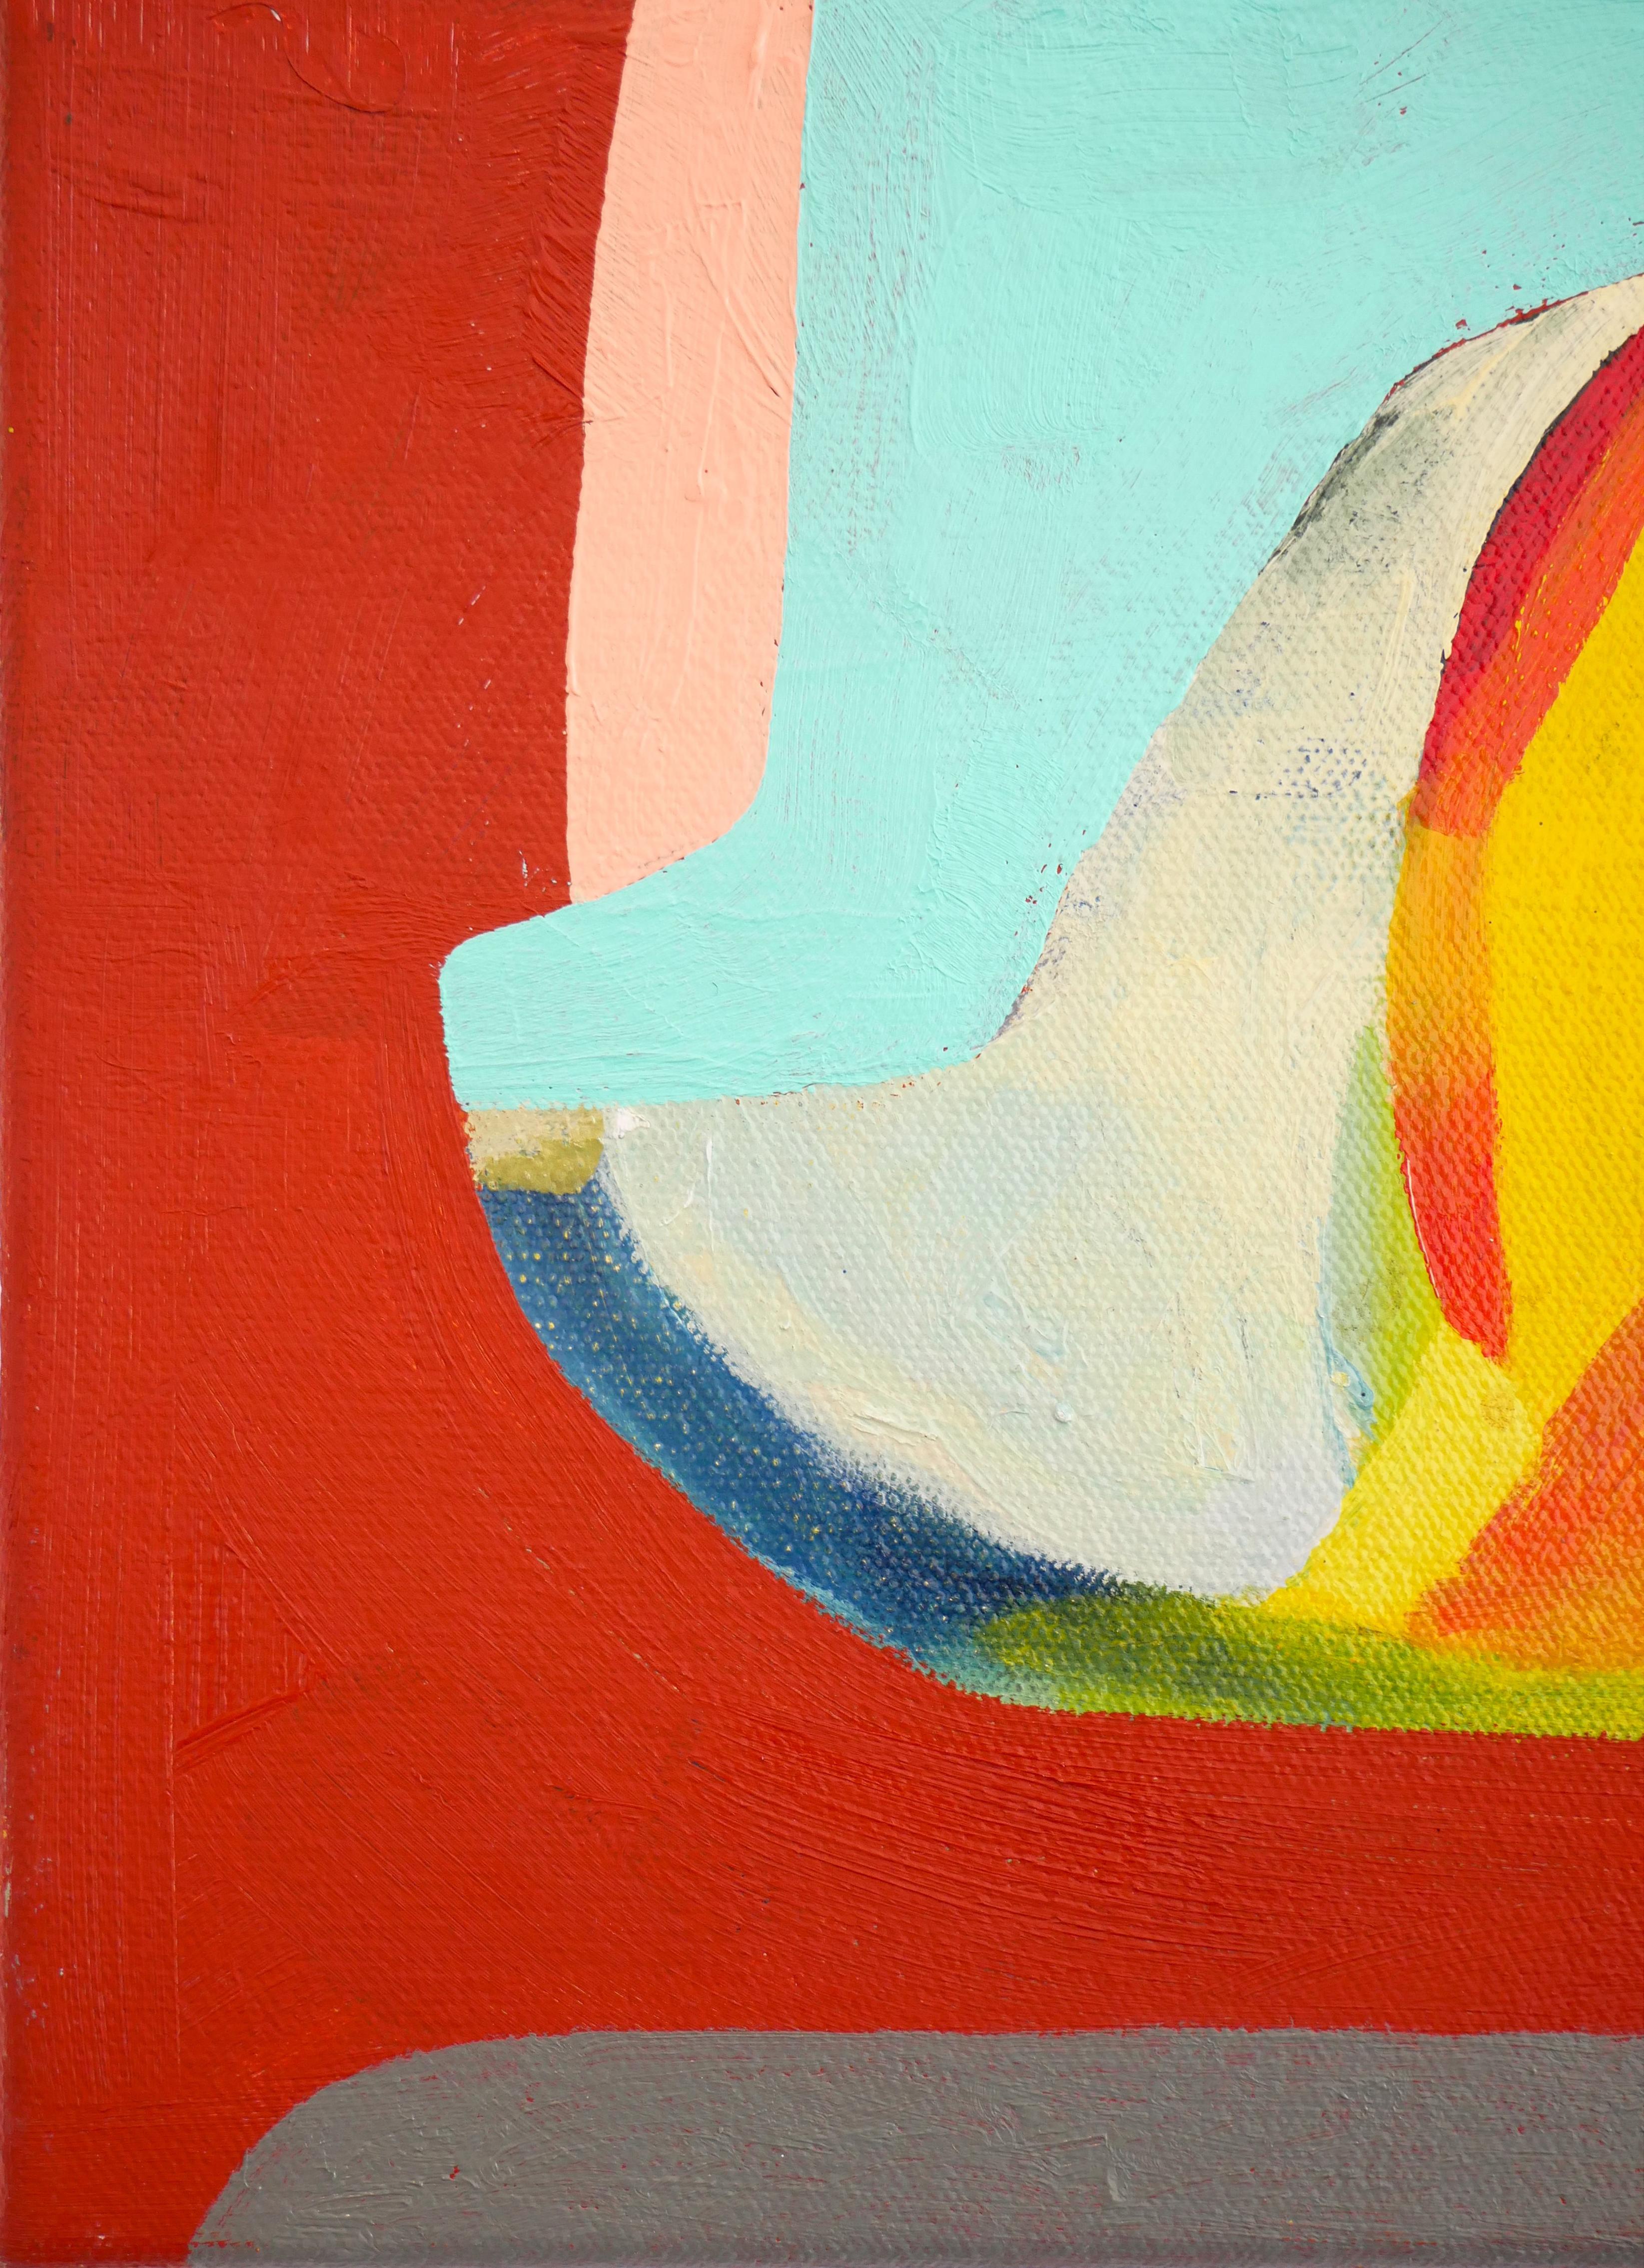 Contemporary colorful abstract painting by local Houston artist Peter Healy. Currently featured in the show 